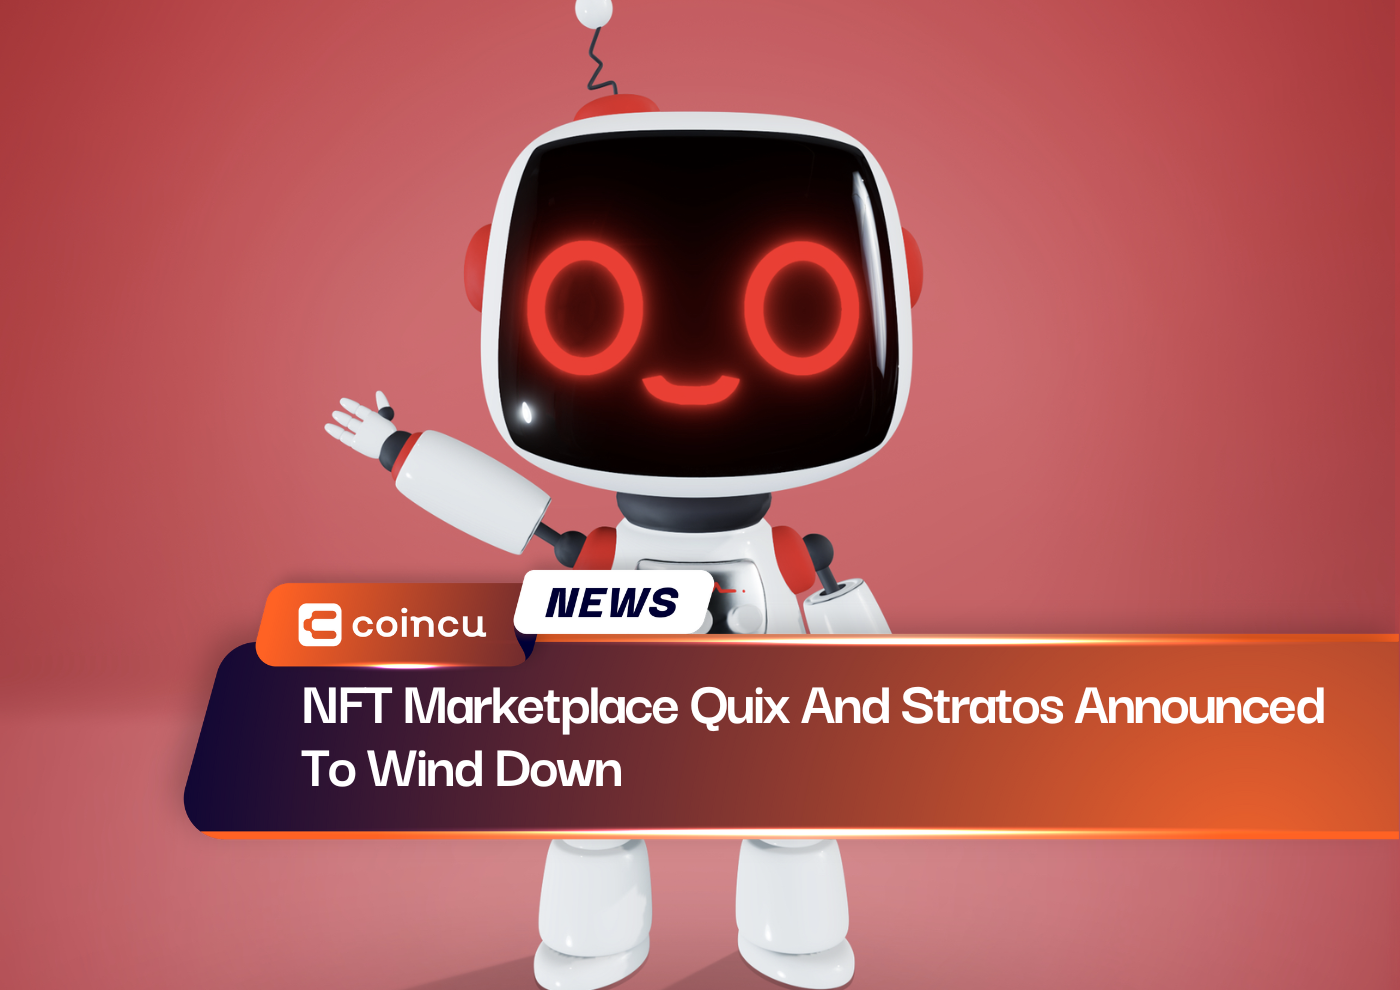 NFT Marketplace Quix And Stratos Announced To Wind Down